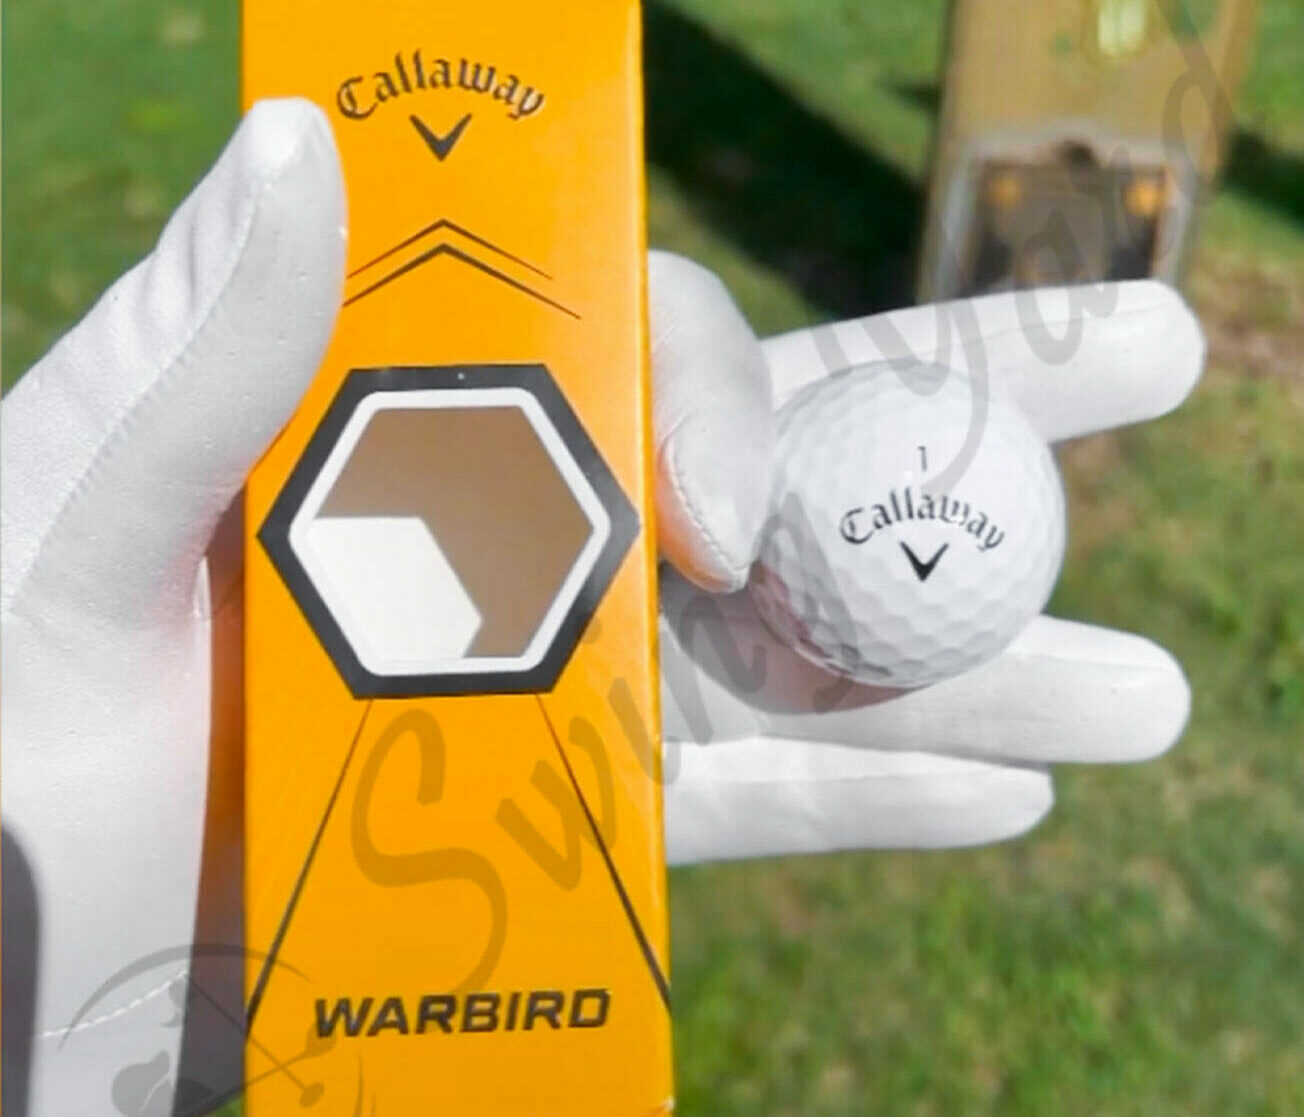 Me holding Callaway Warbird ball at the golf course